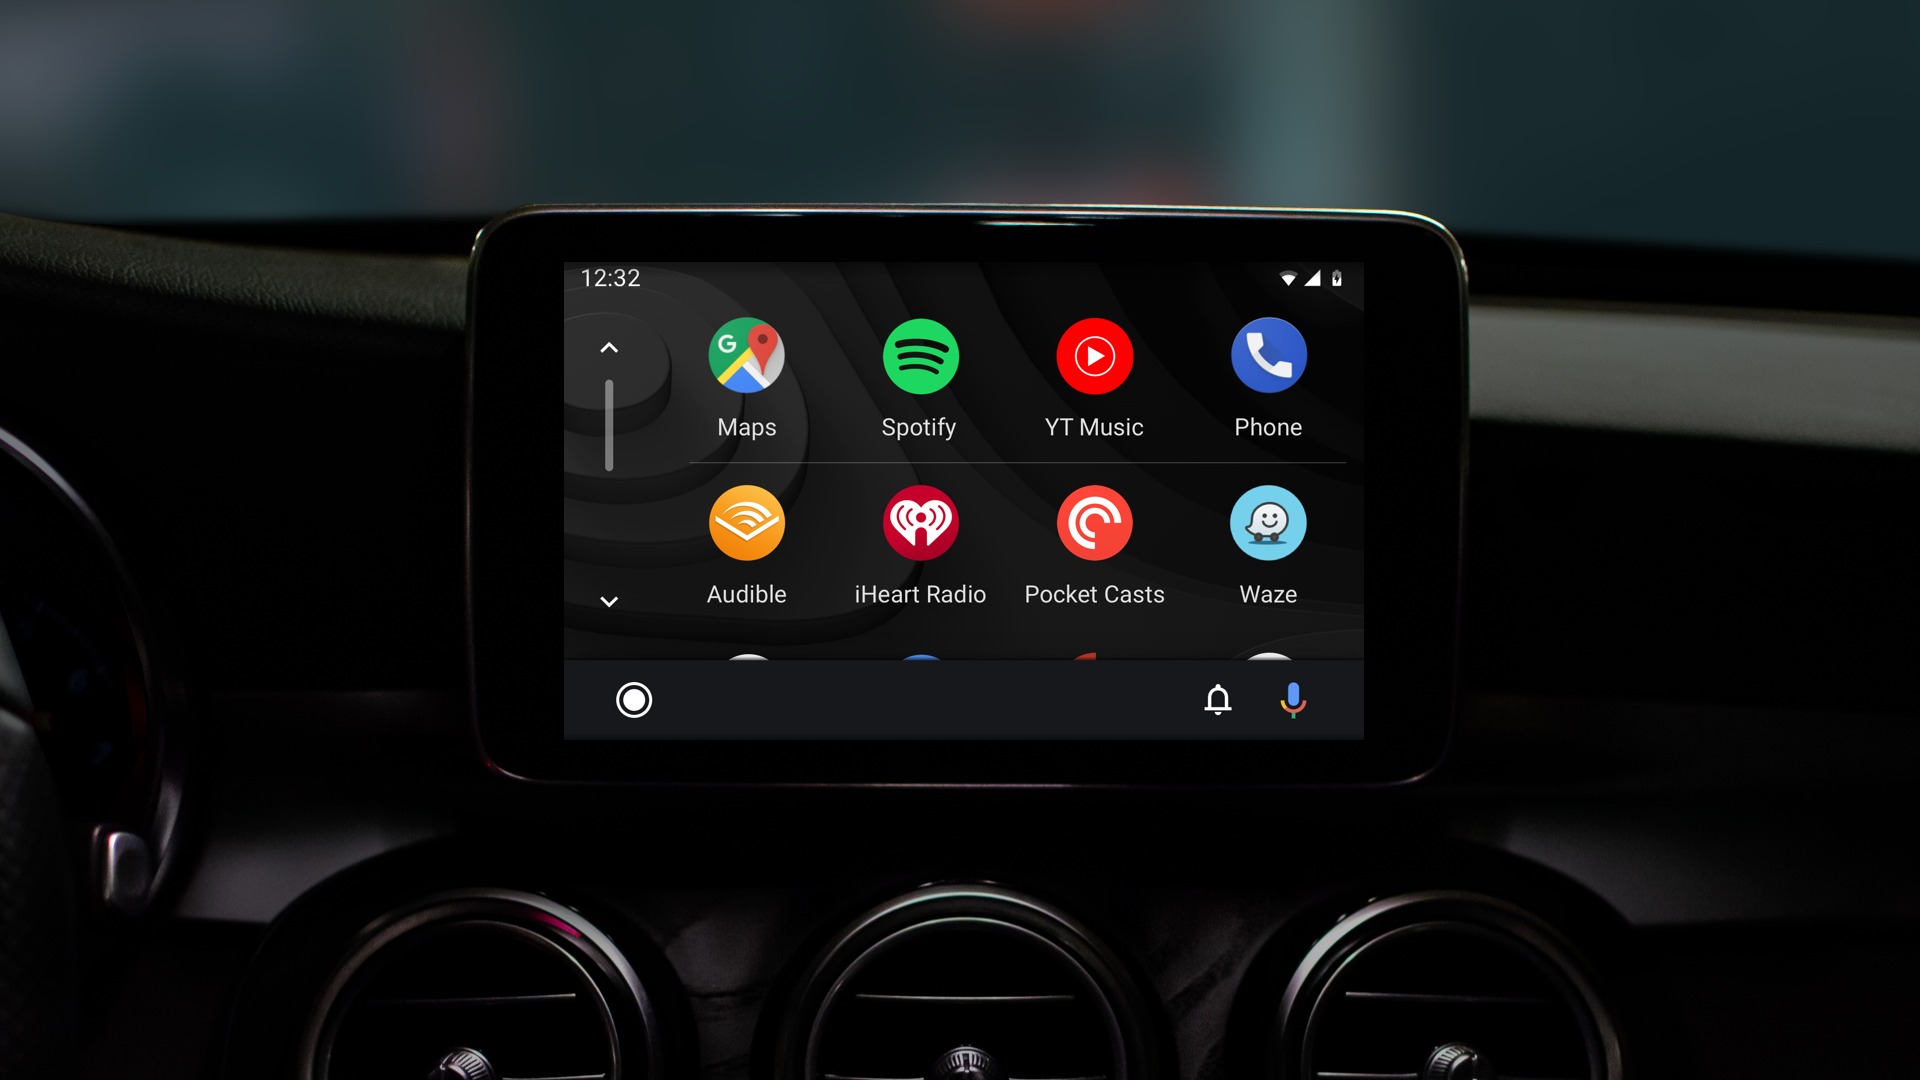 android auto6.0 update coming soon wallpapers